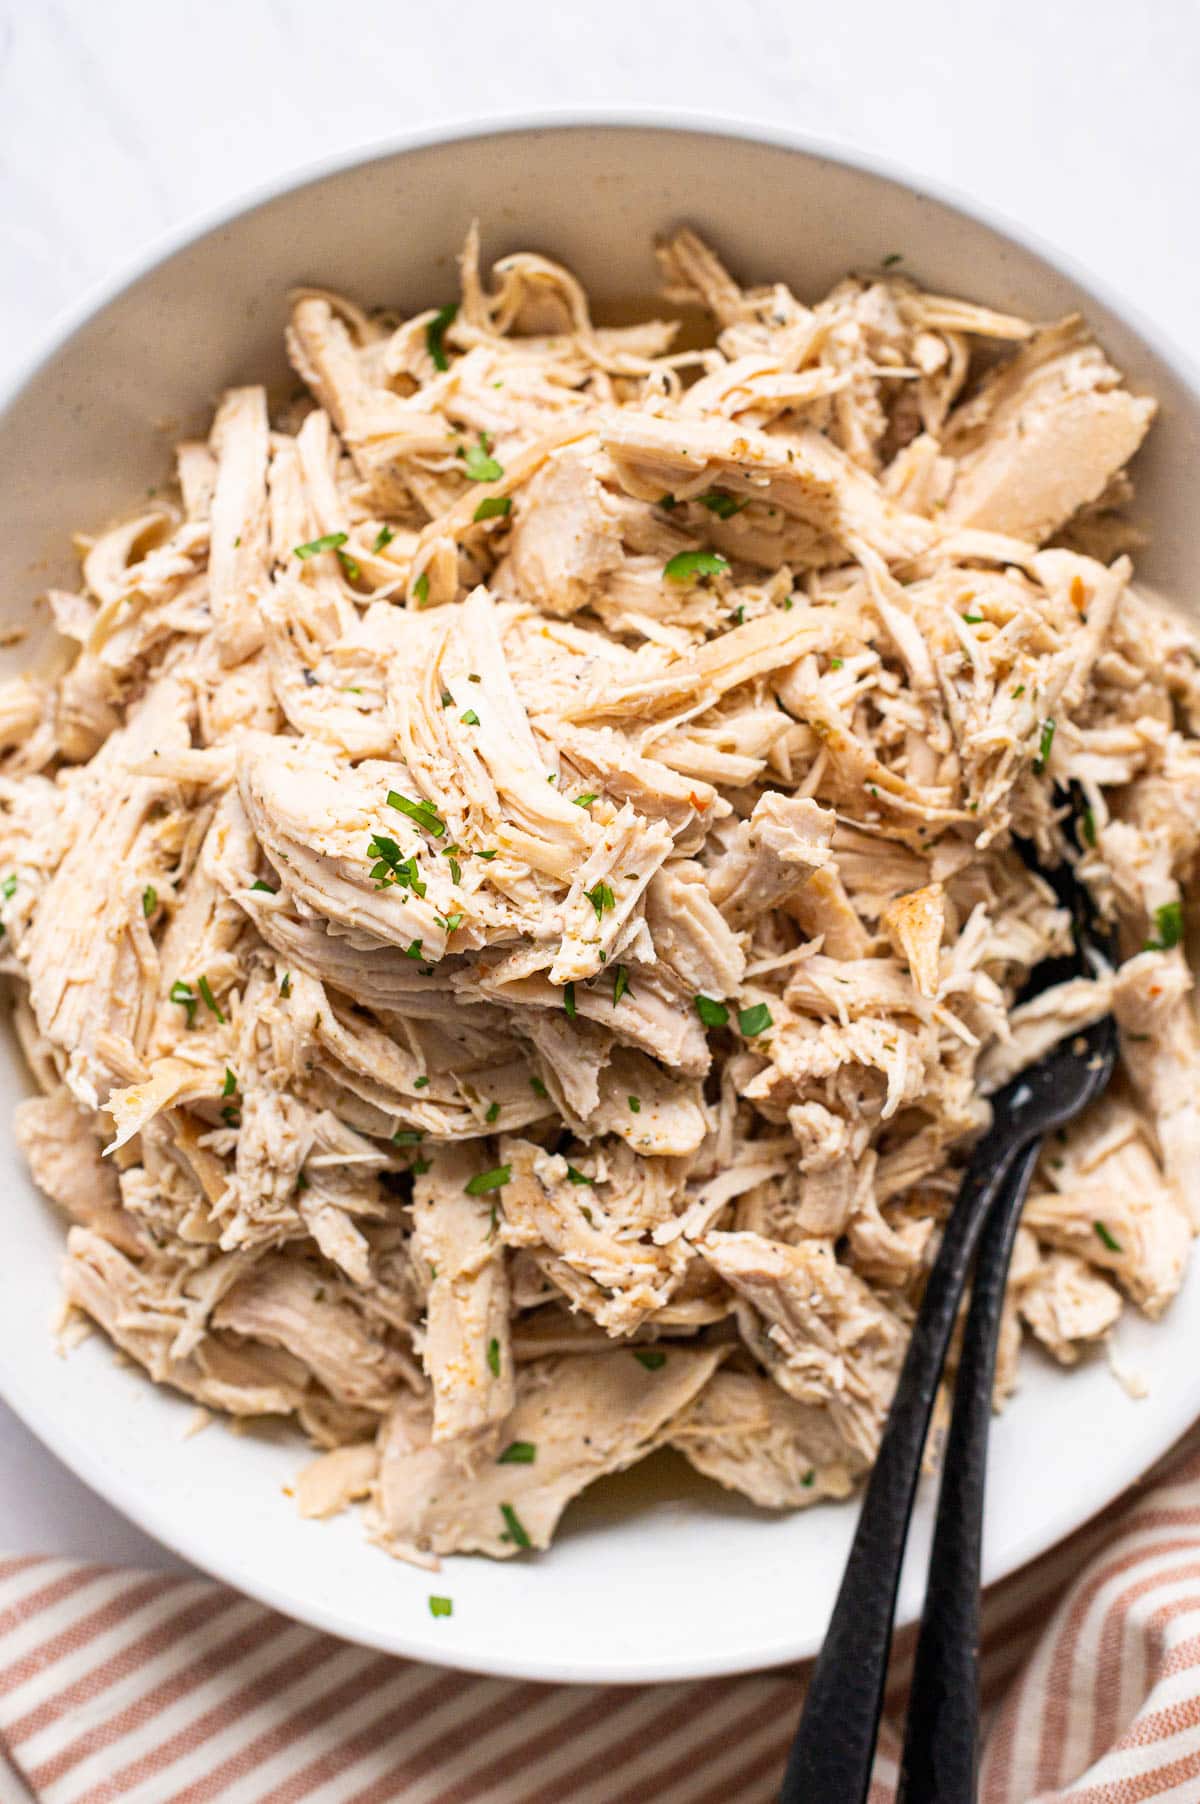 Shredded chicken on a plate with forks garnished with parsley.